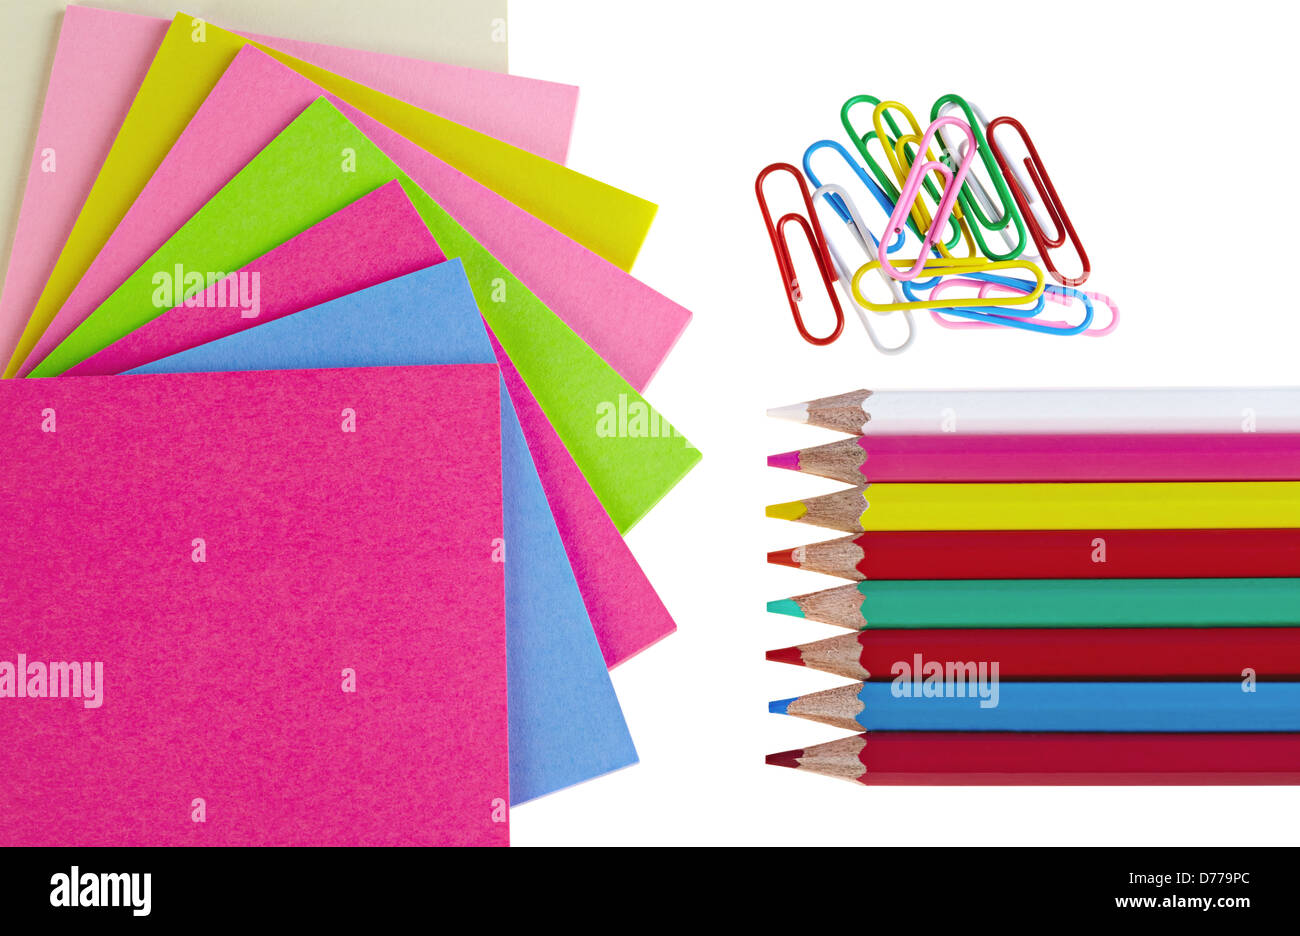 Colorful pencils, clips and note papers on white background Stock Photo